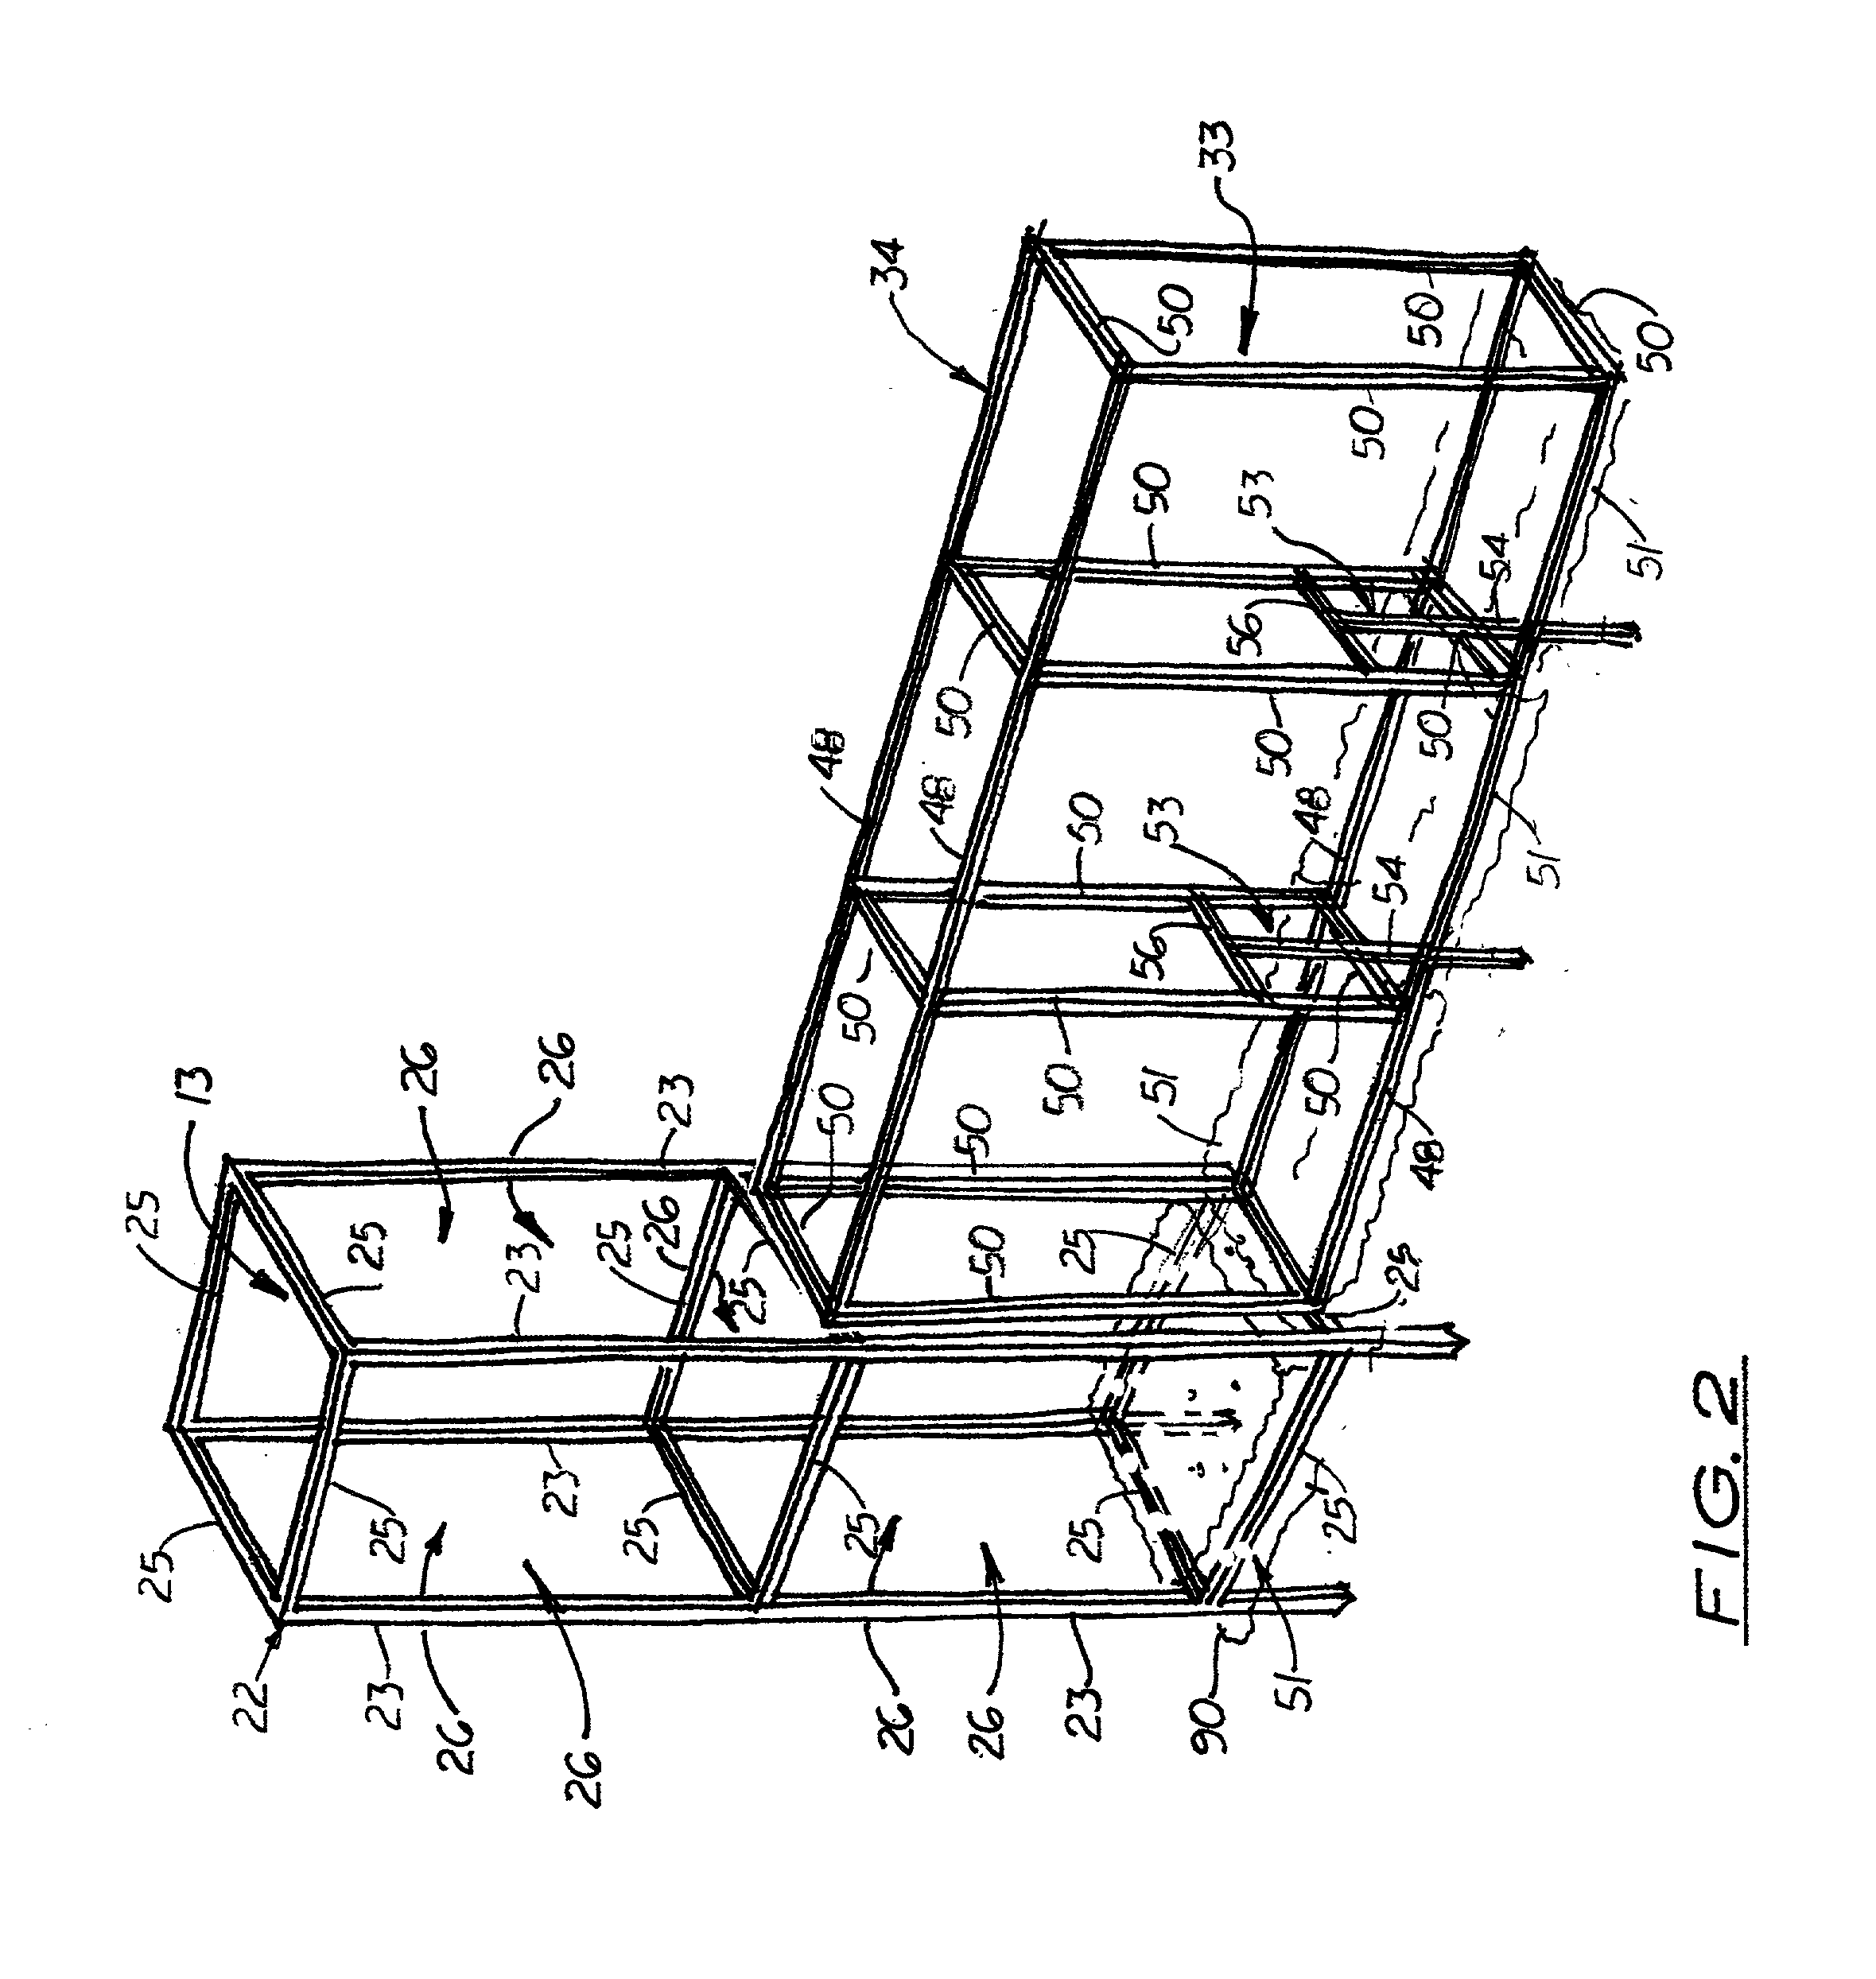 Solid-appearing fence system